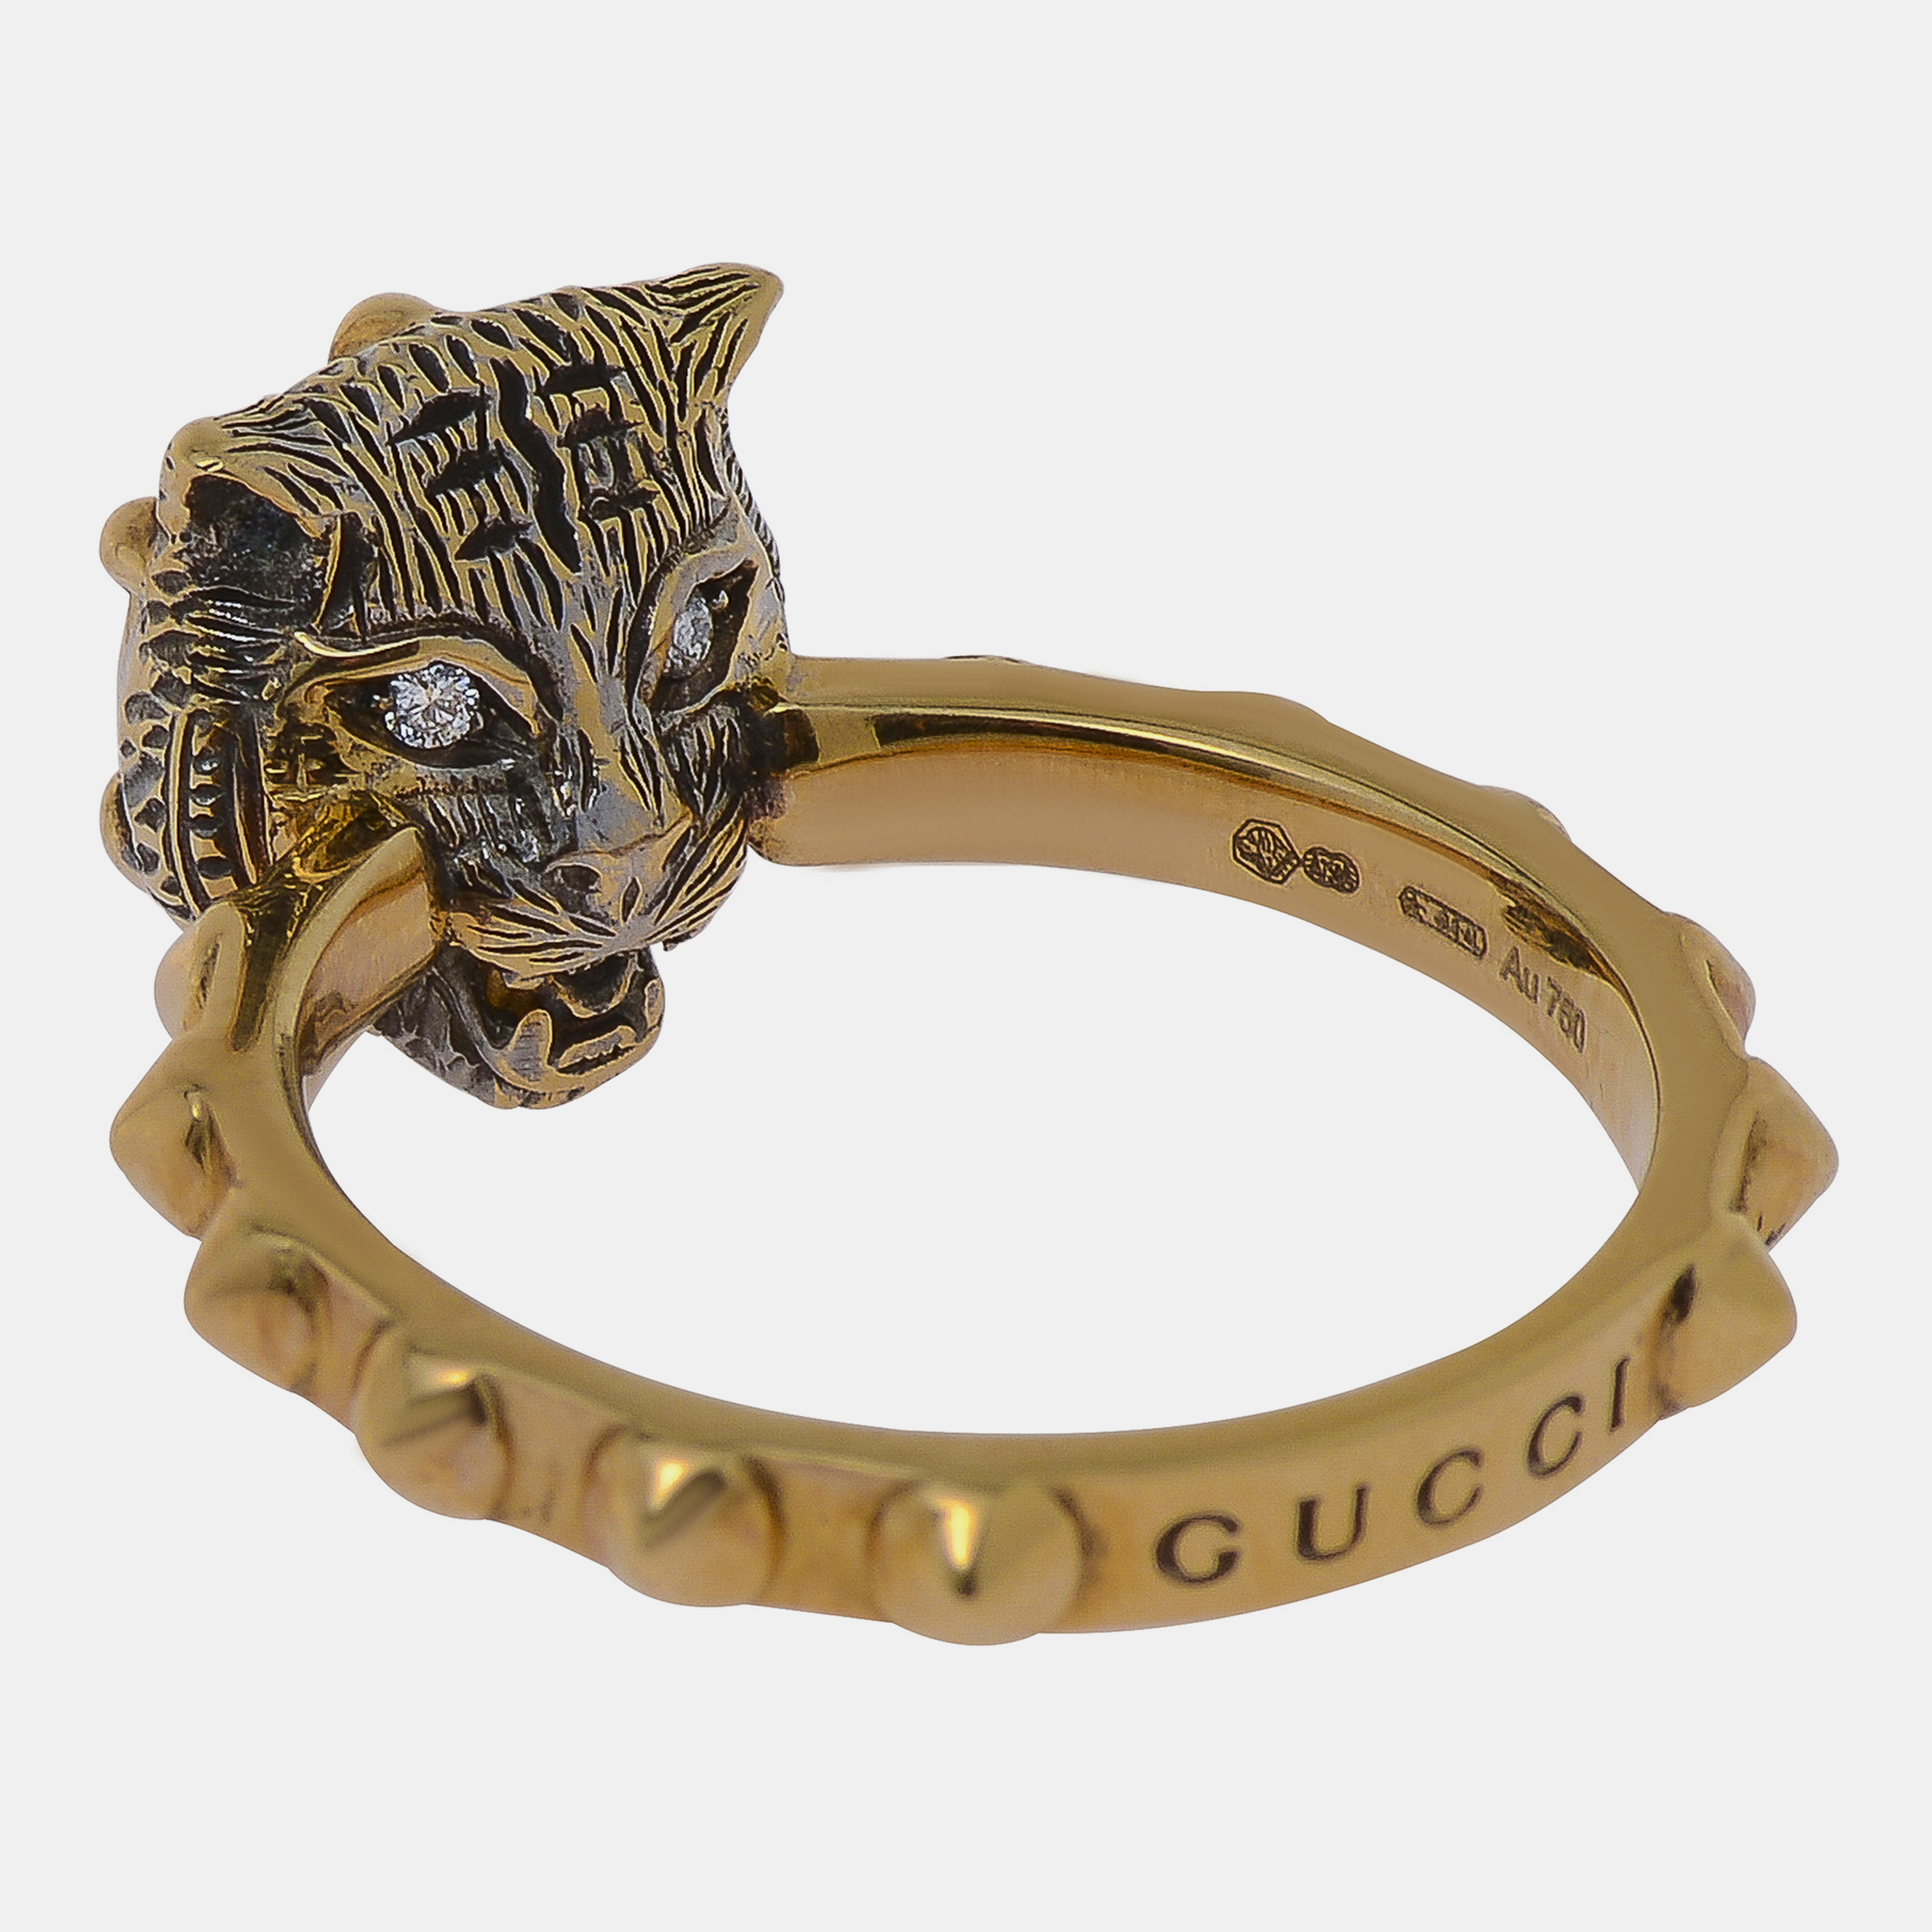 

Gucci Le Marches des Merveilles 18K Yellow Gold, Turquoise and Diamond Statement Ring Sz. 7